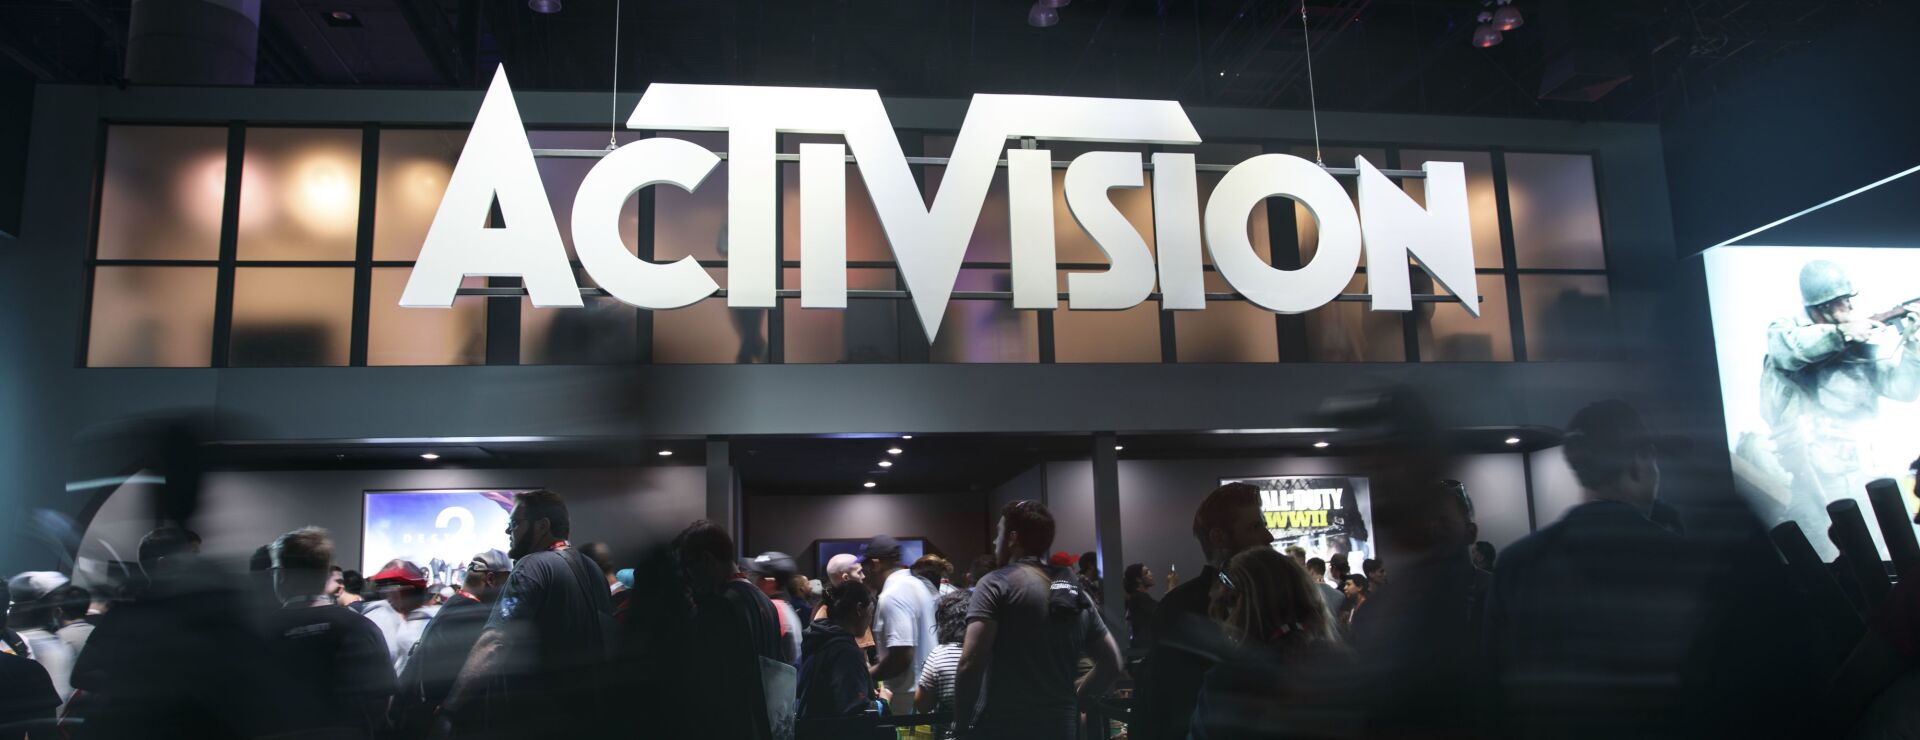 Xbox Activision FTC trial begins, Microsoft's gaming dominance at risk in $70B merger battle. 15